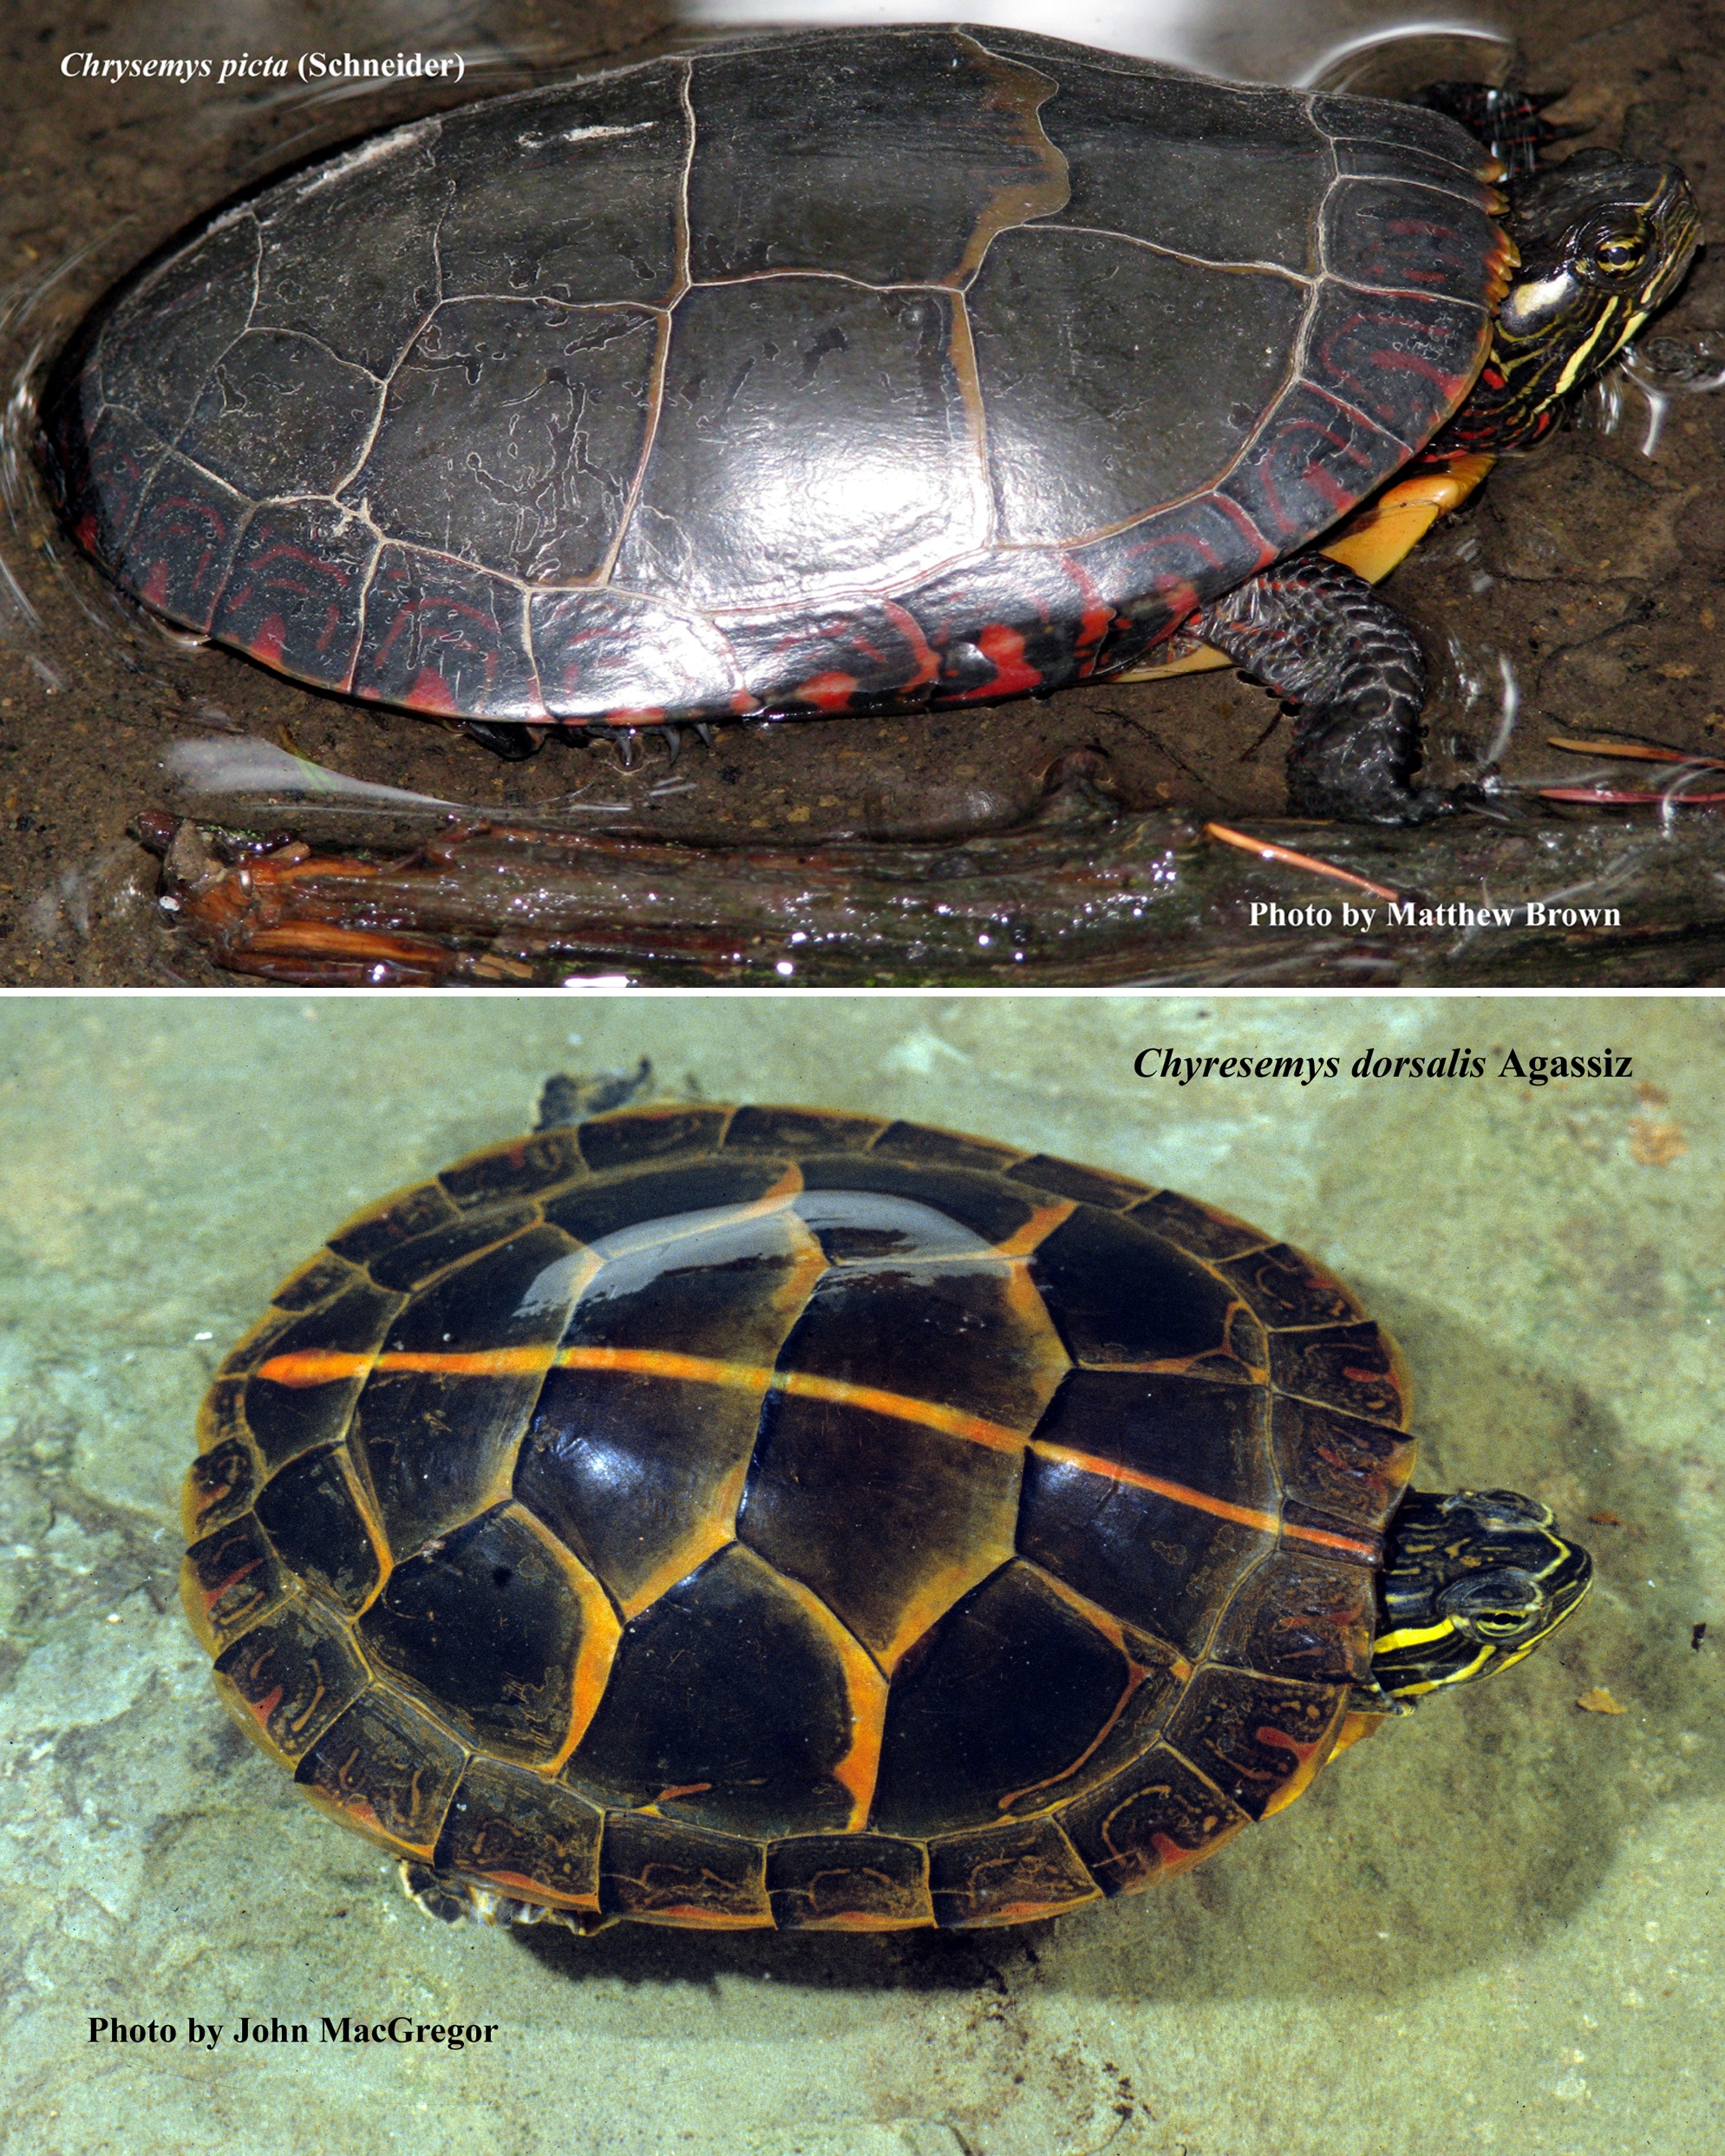 Chrysemys picta (Schneider) – Painted Turtle and <em>Chrysemys dorsalis </em> Agassiz - Southern Painted Turtle